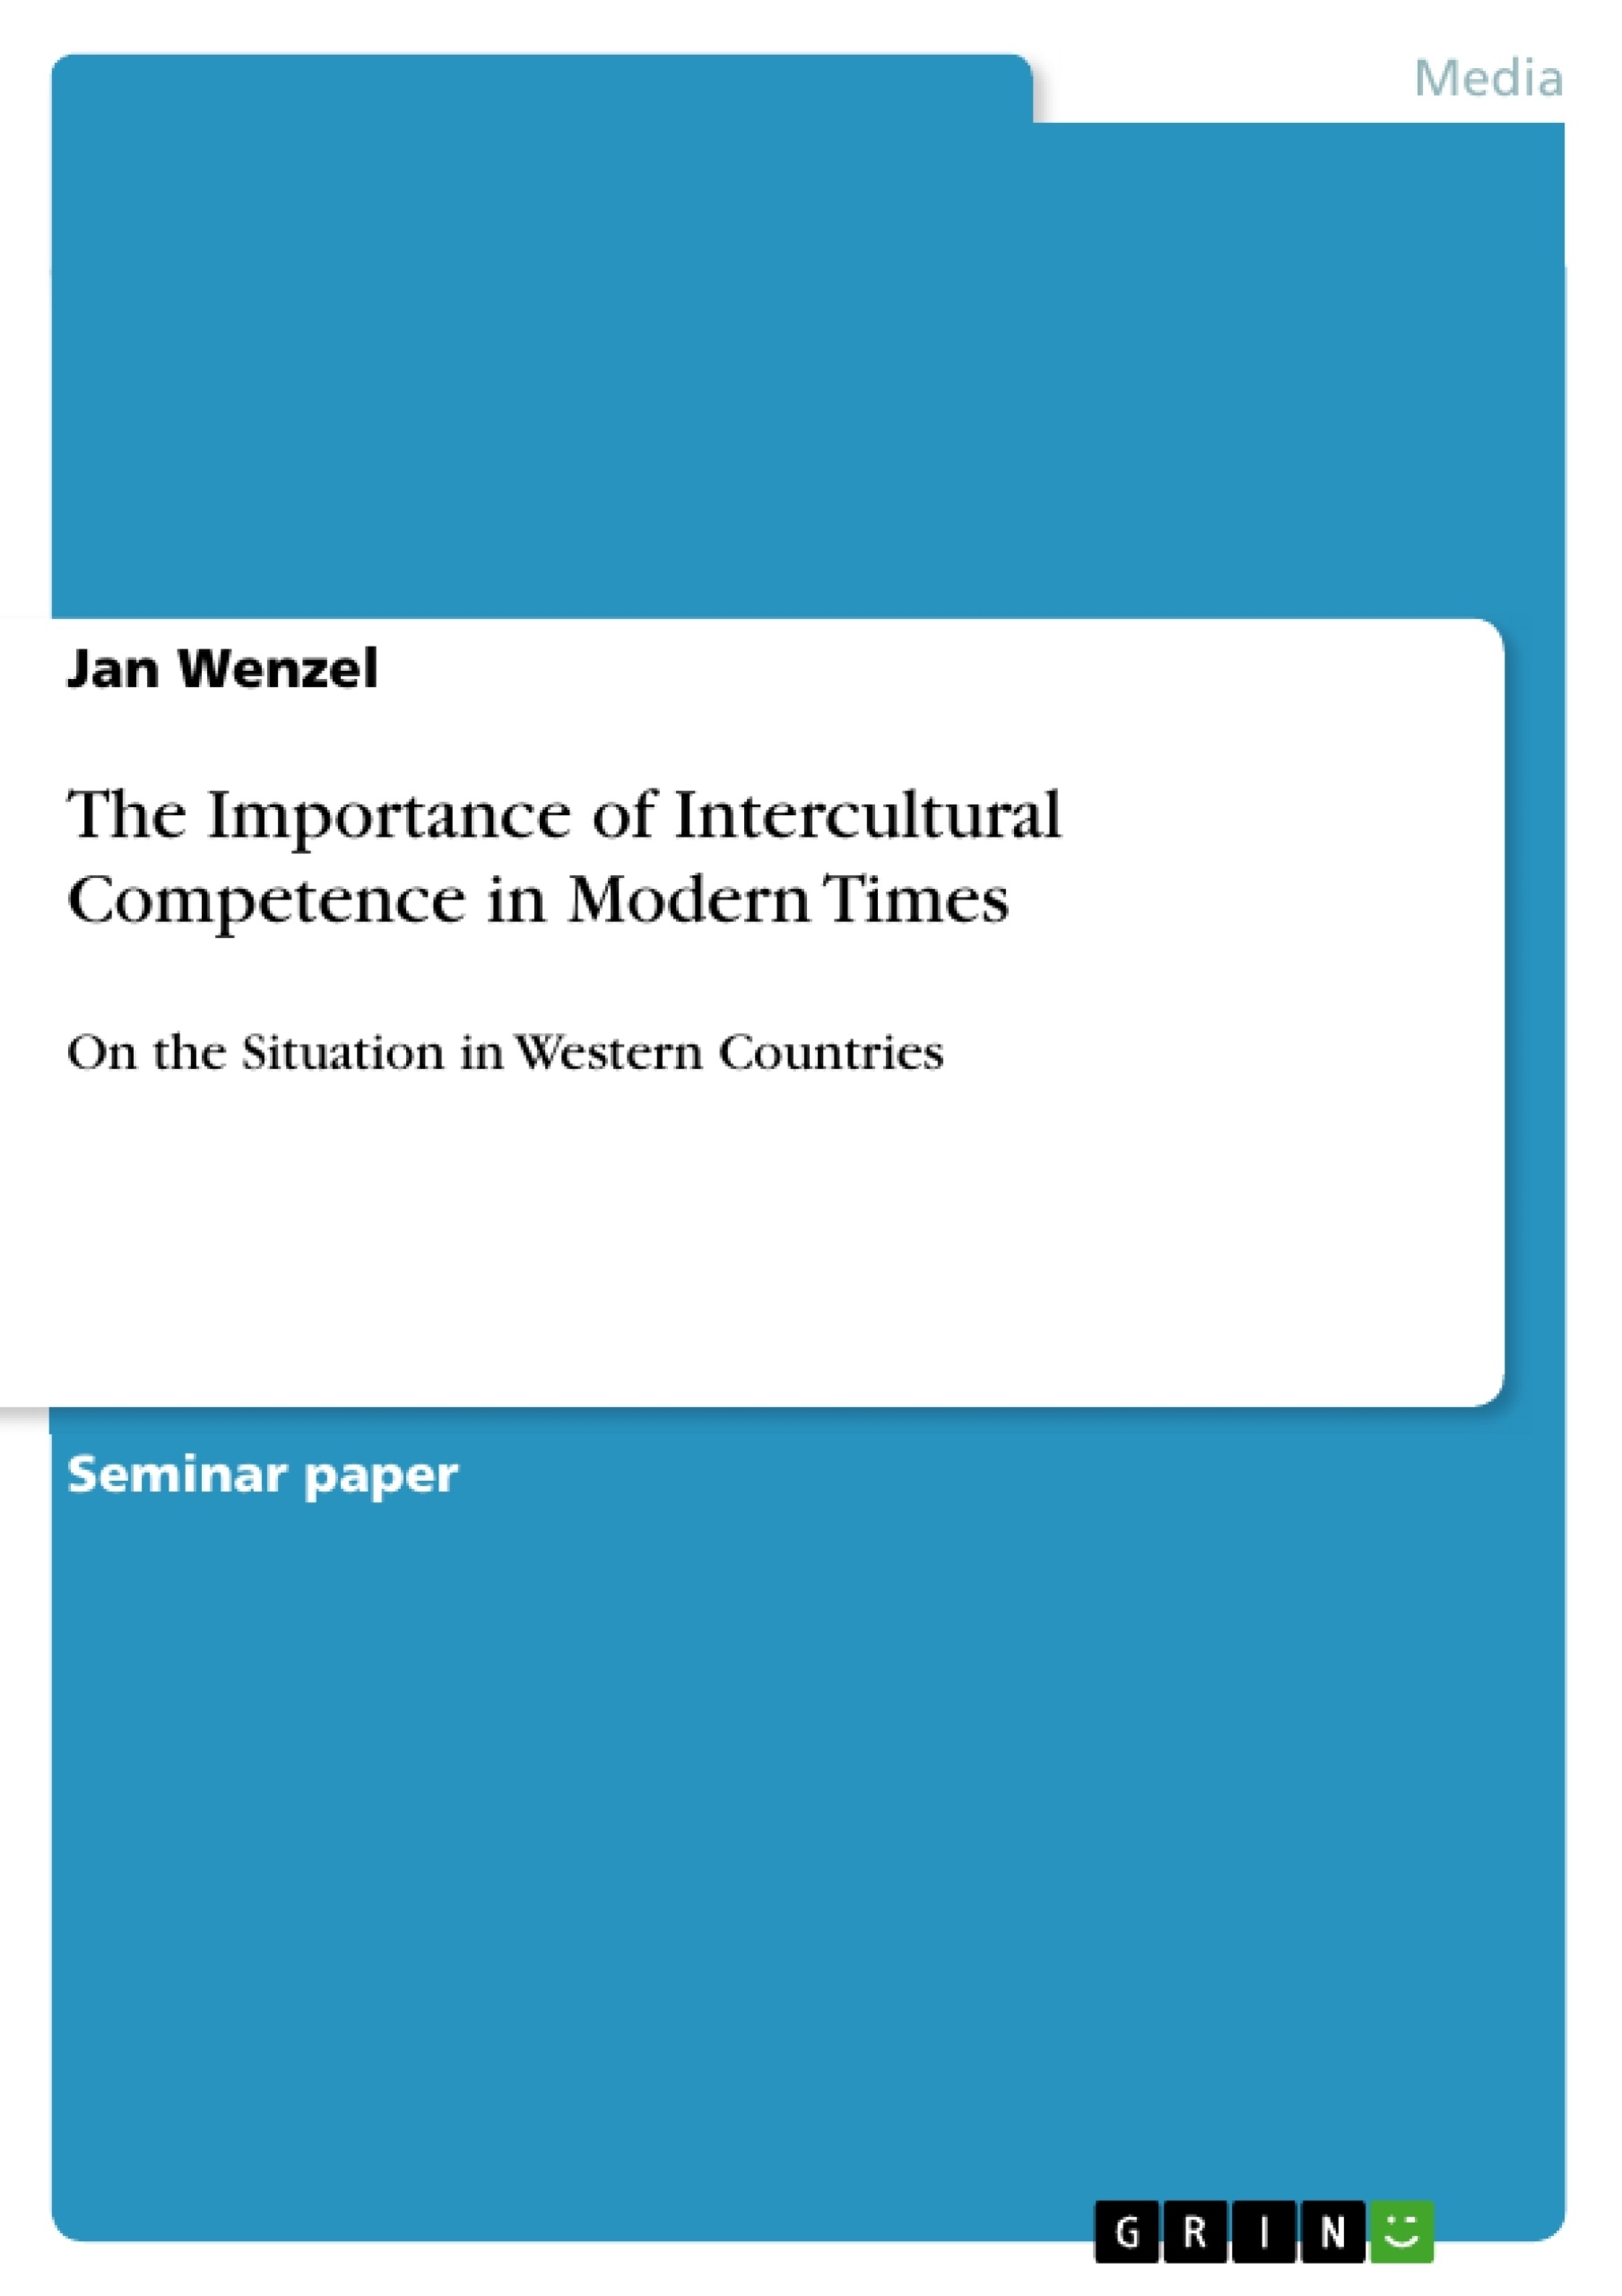 Título: The Importance of Intercultural Competence in Modern Times